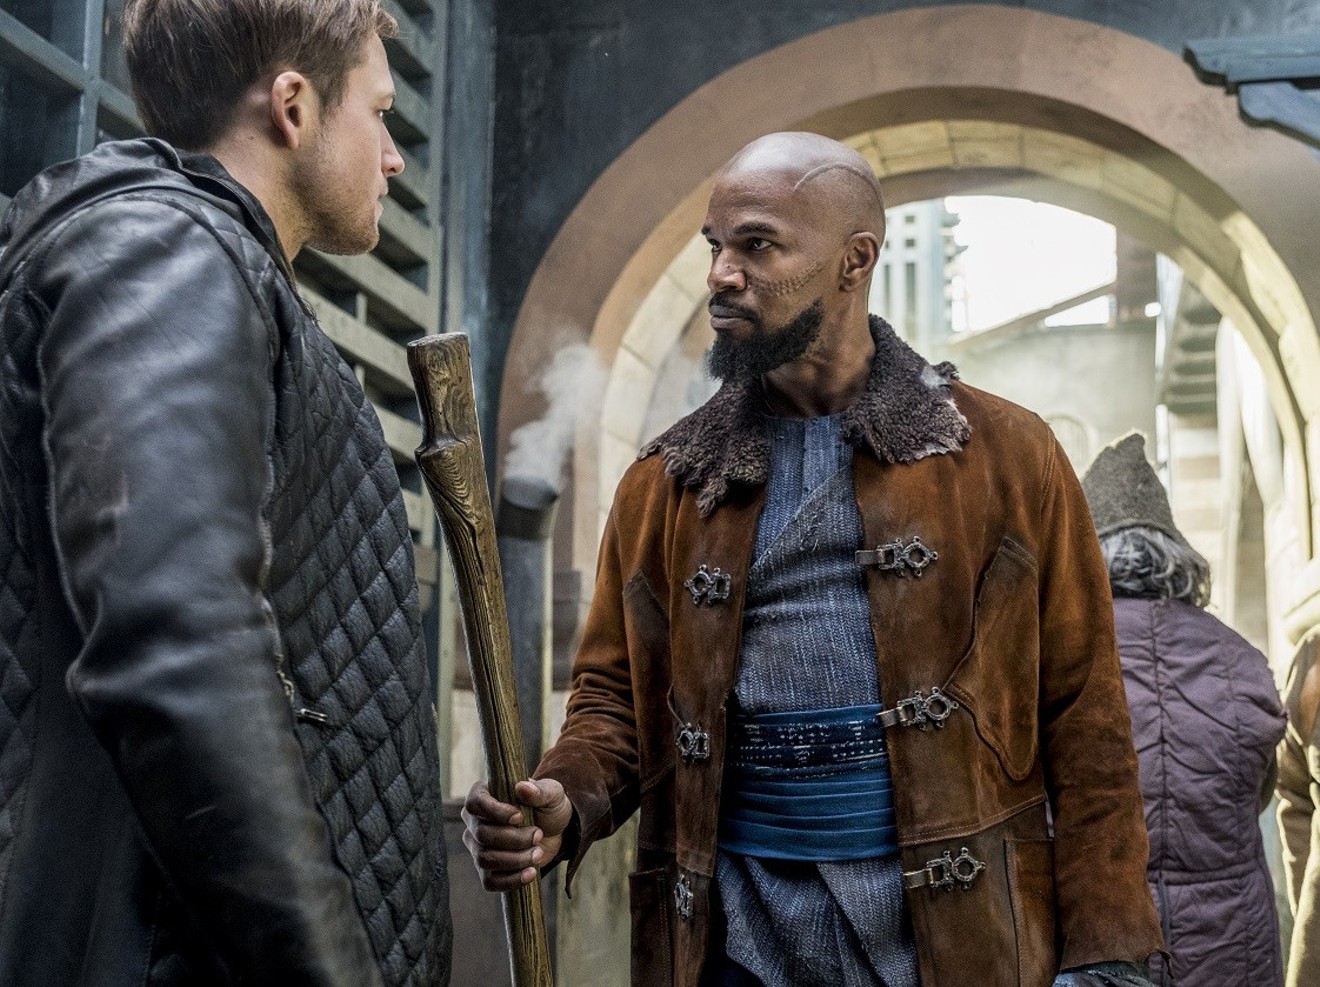 In the latest remake of Robin Hood, Taron Egerton (left) plays the title character who steals from the rich and gives to the poor, while Jamie Foxx portrays Little John as a Moorish commander set on overthrowing the evil English leadership.